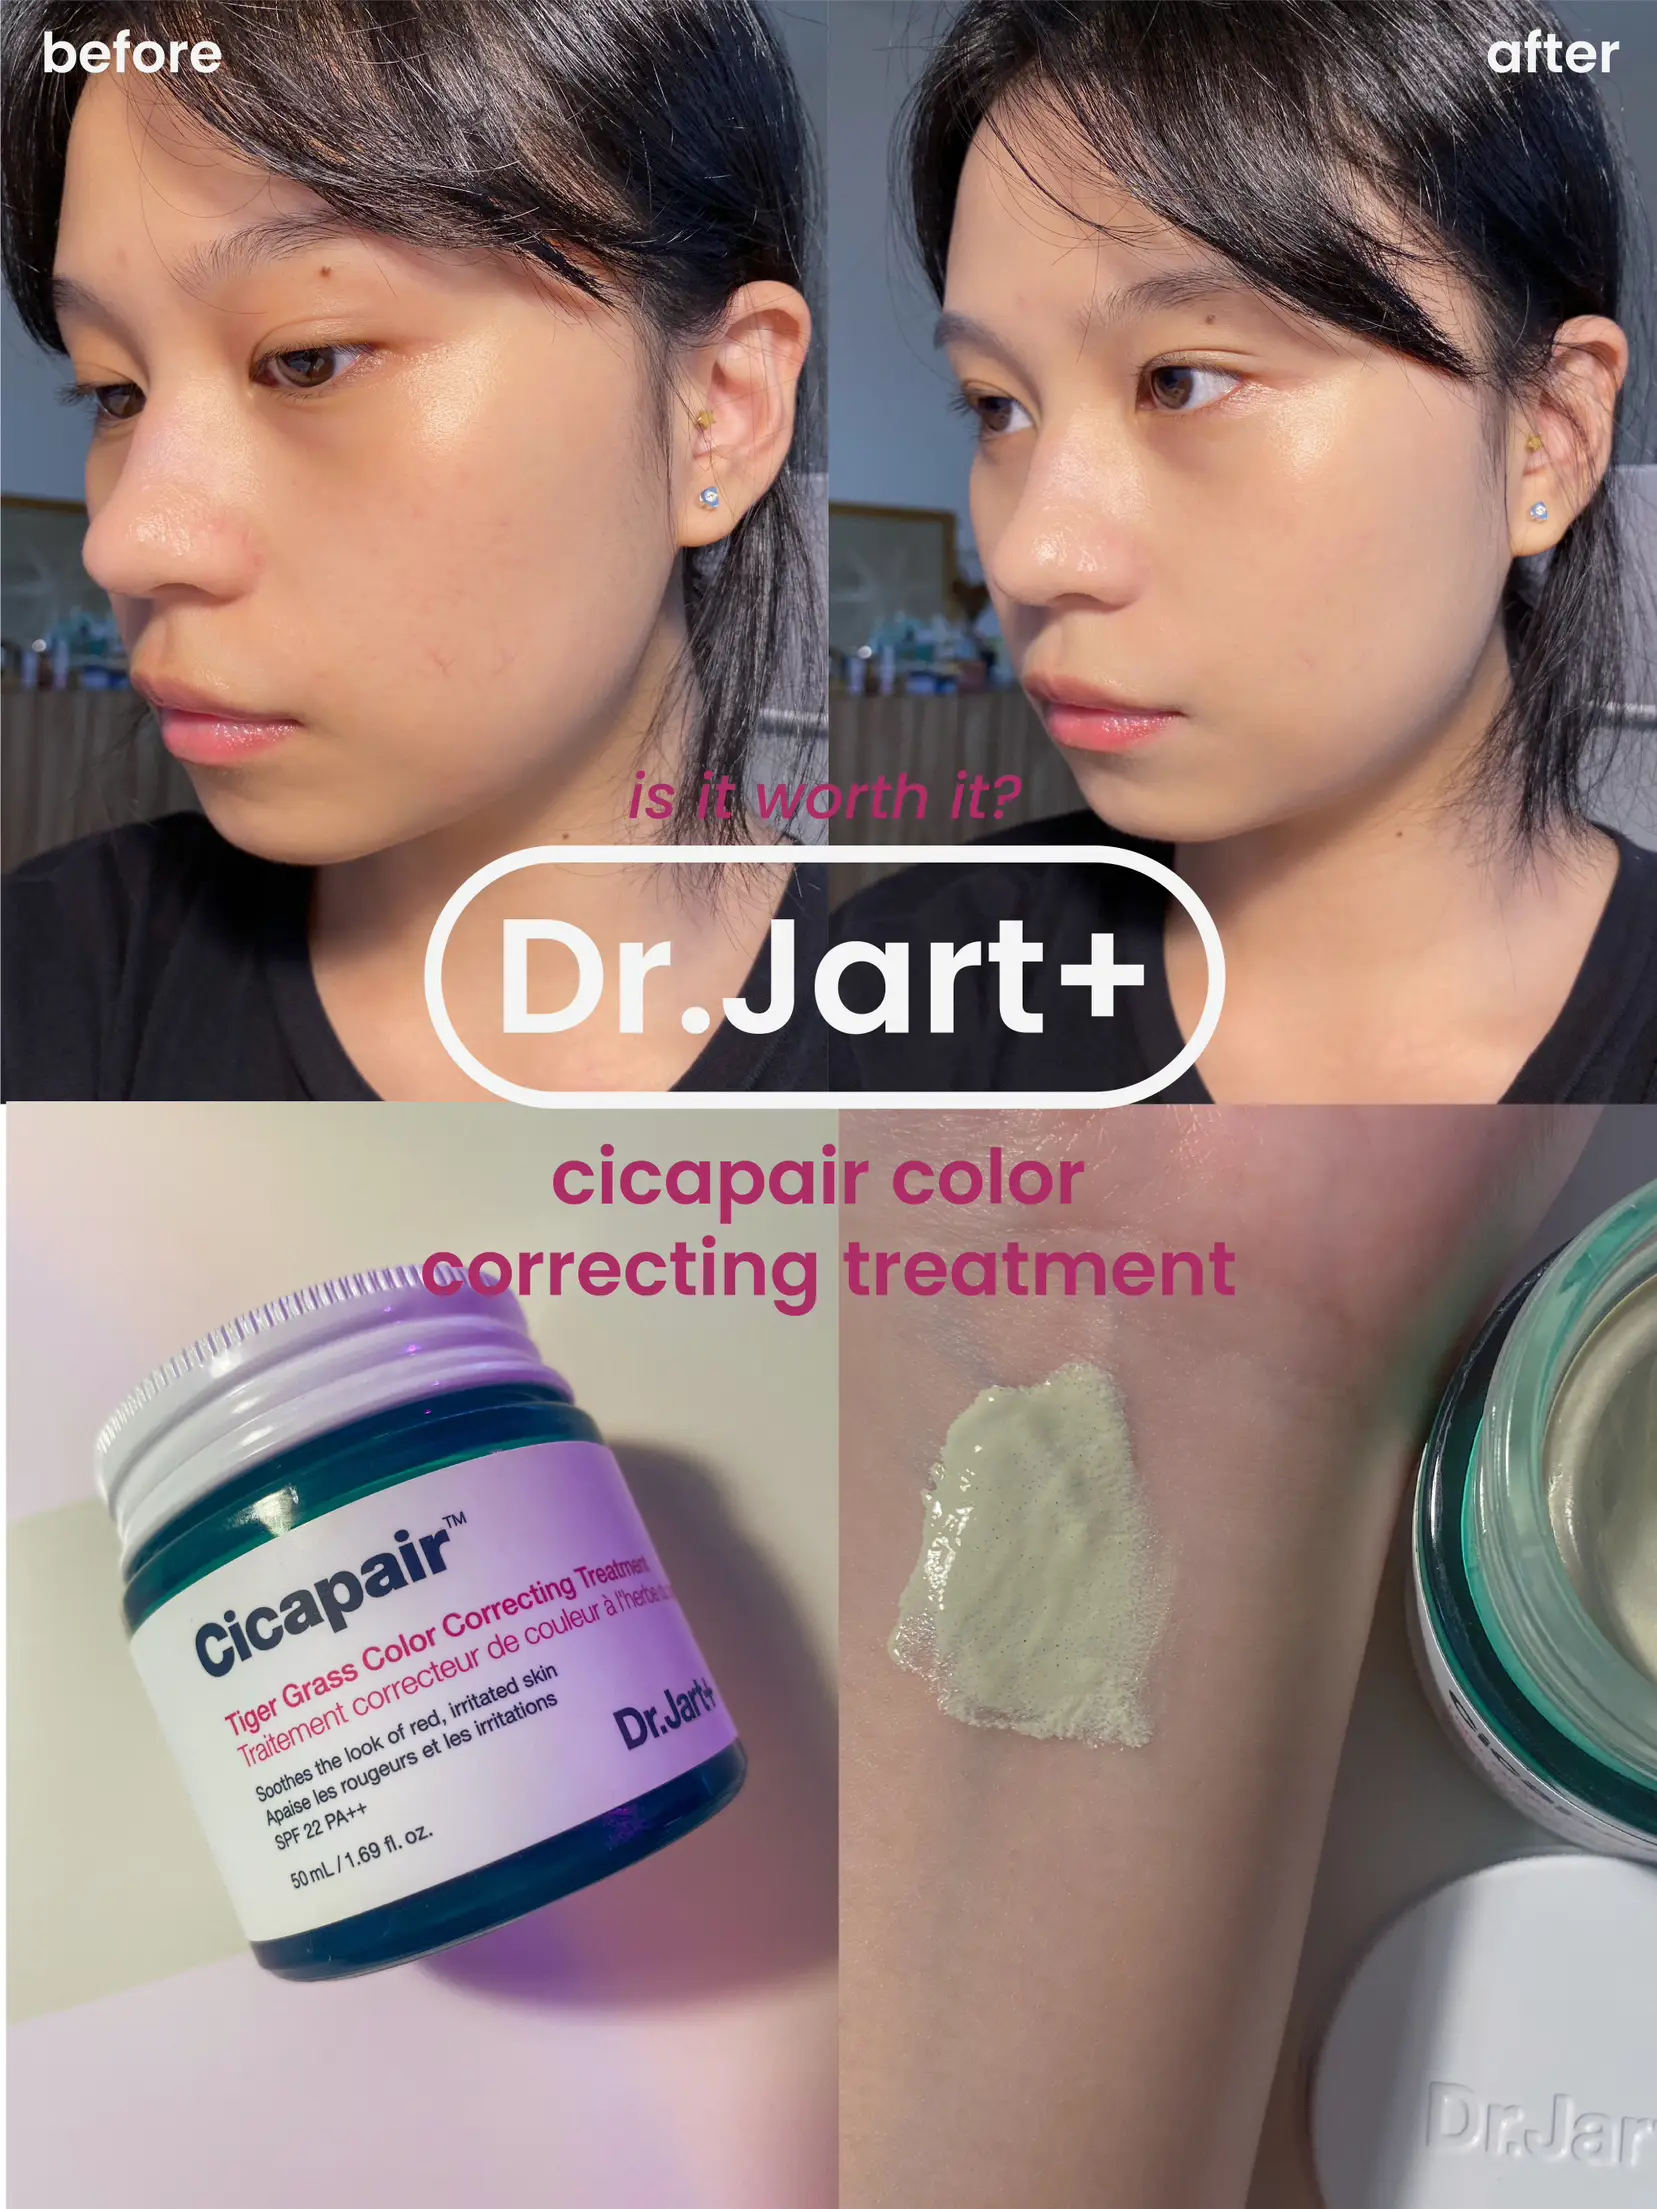 Dr. Jart+'s Cicapair Tiger Grass Color Correcting Review